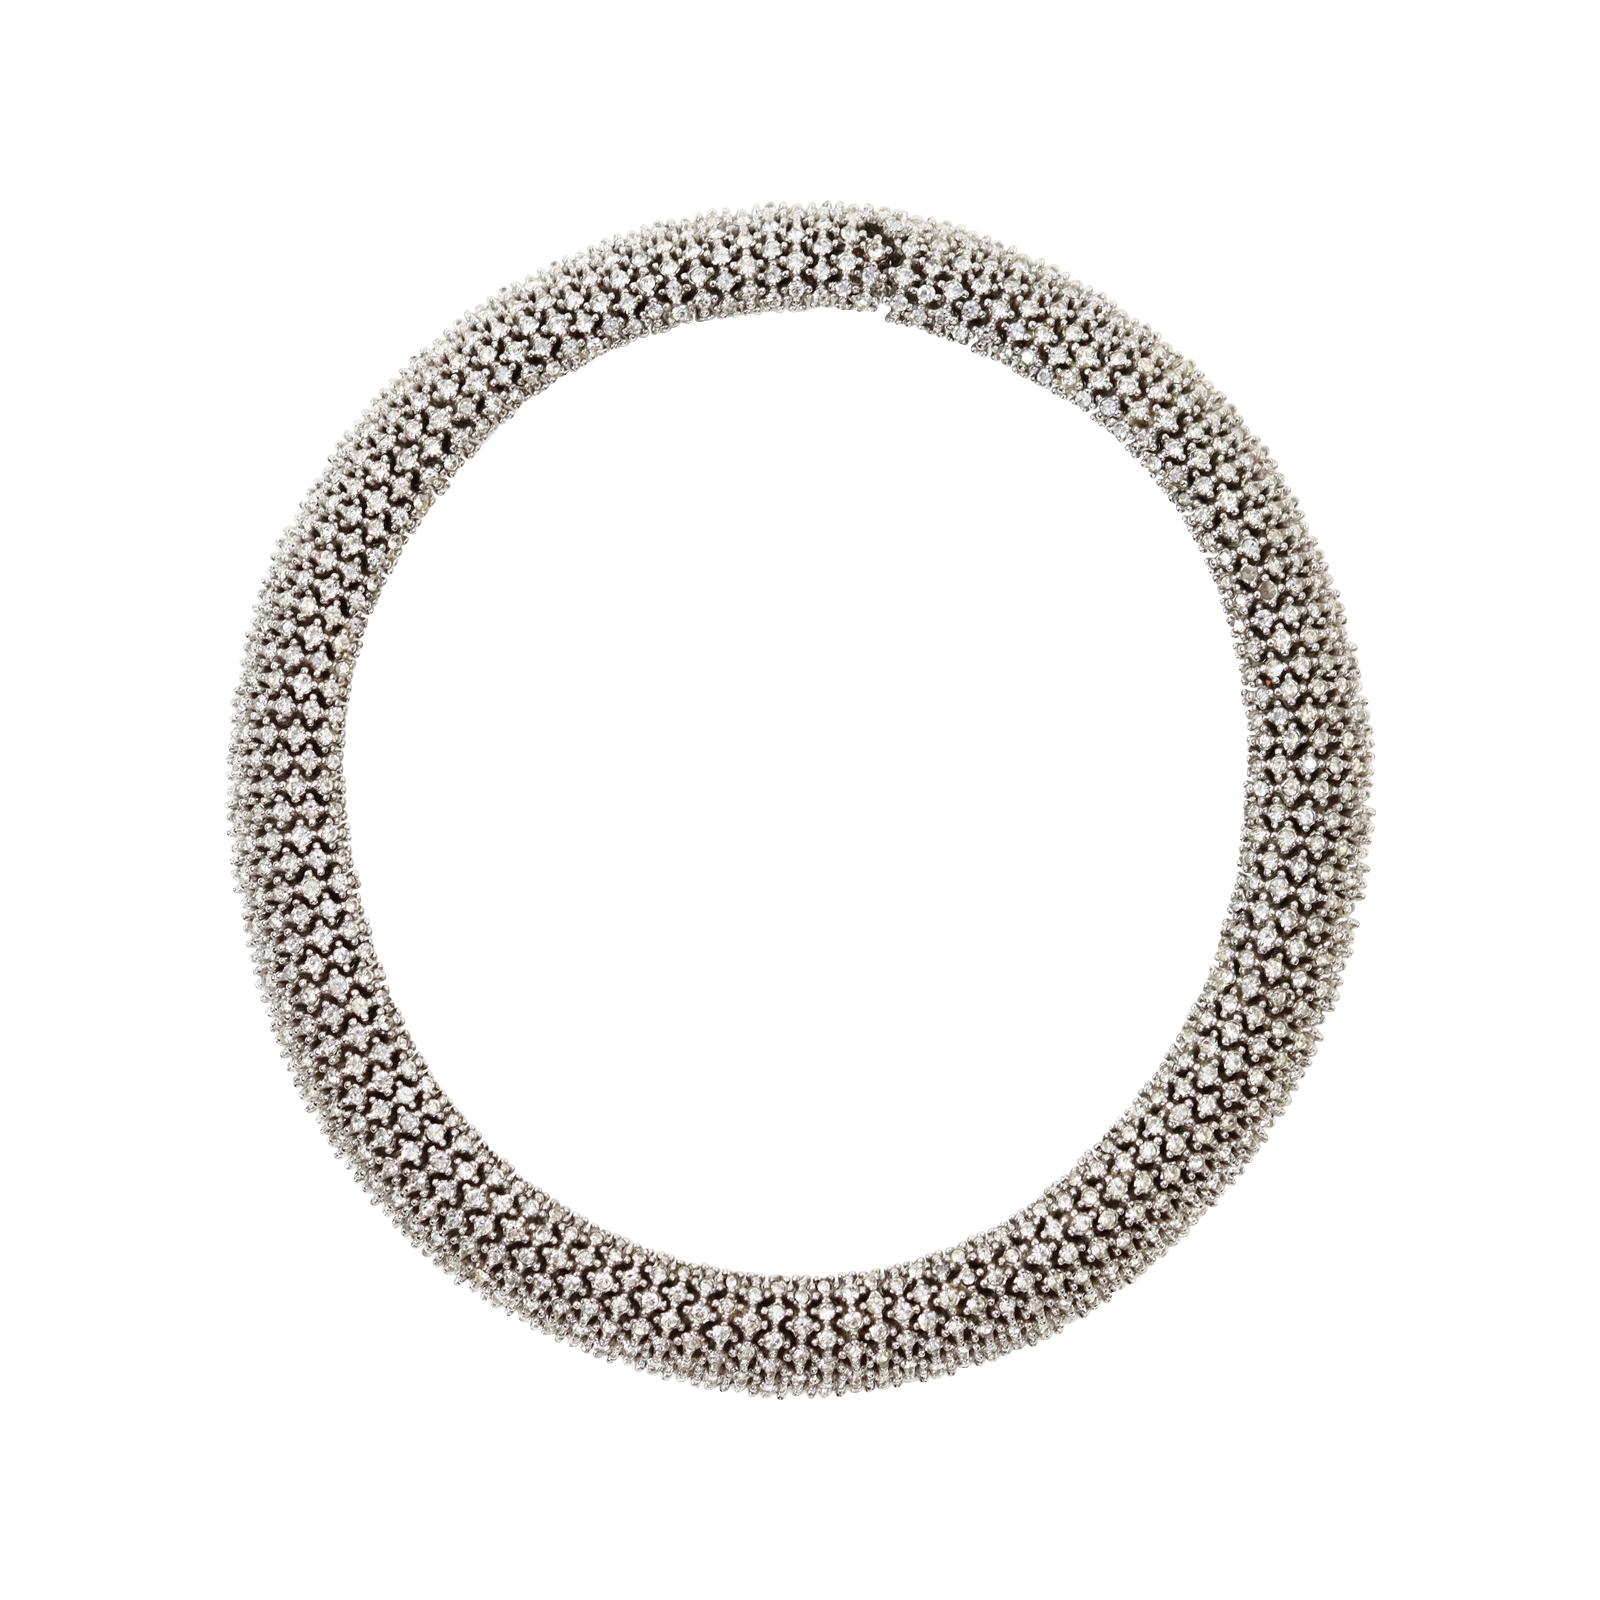 Vintage Ciner Silver Tone Diamante Rounded Choker Necklace Circa 1980s. No more need be said about this beauty.  It is a classic that has been made throughout the centuries.  Always in style.

Ciner is no longer in business so this is now a